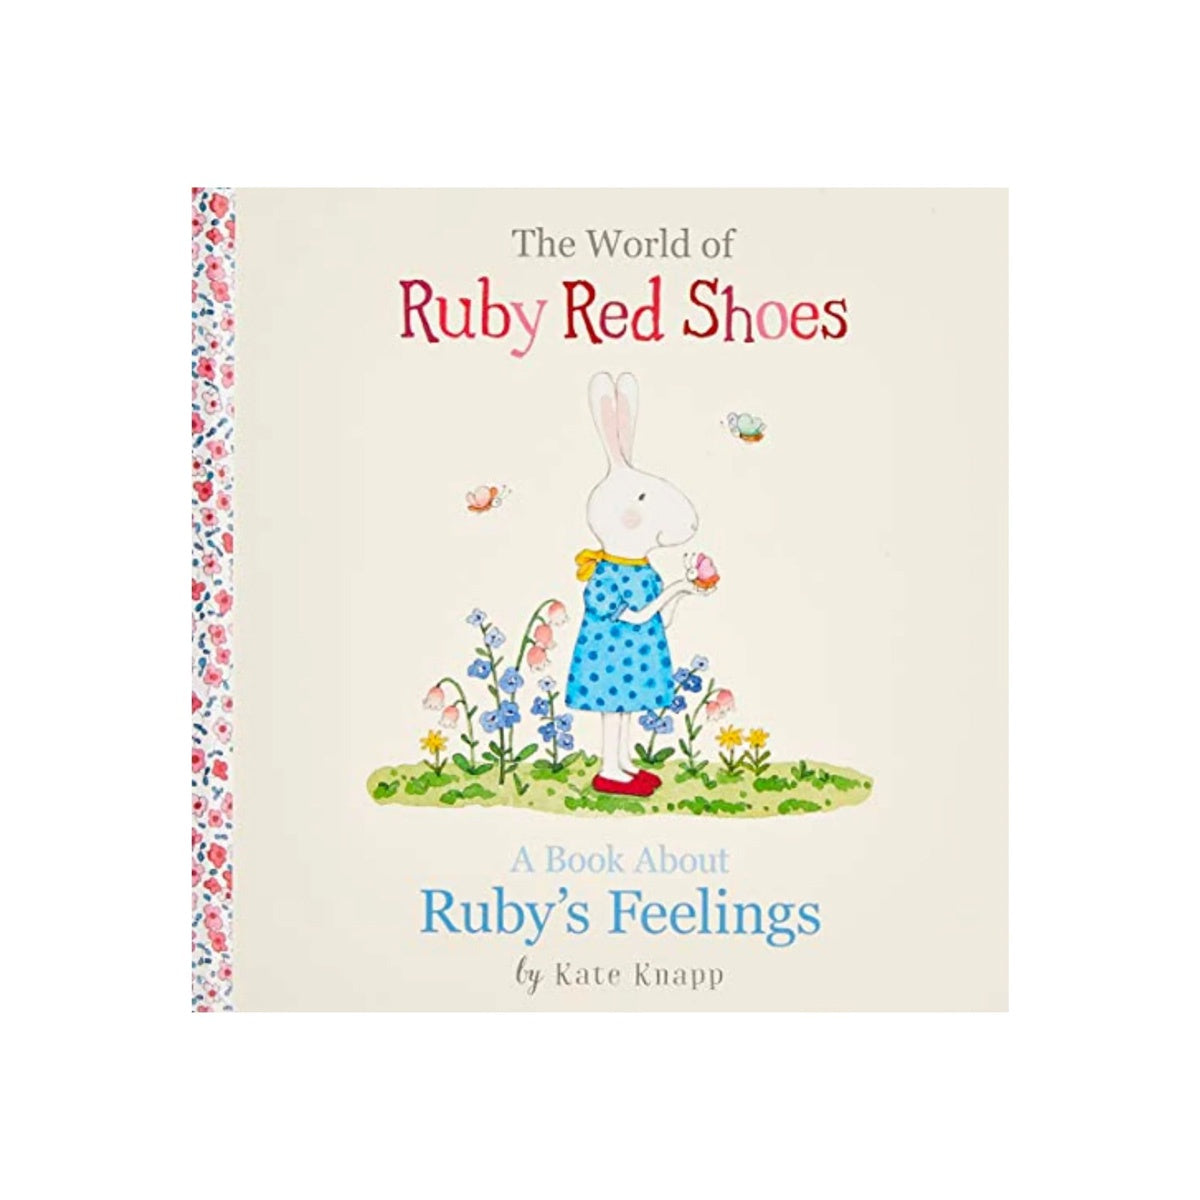 The World Of Ruby Red Shoes: Feelings